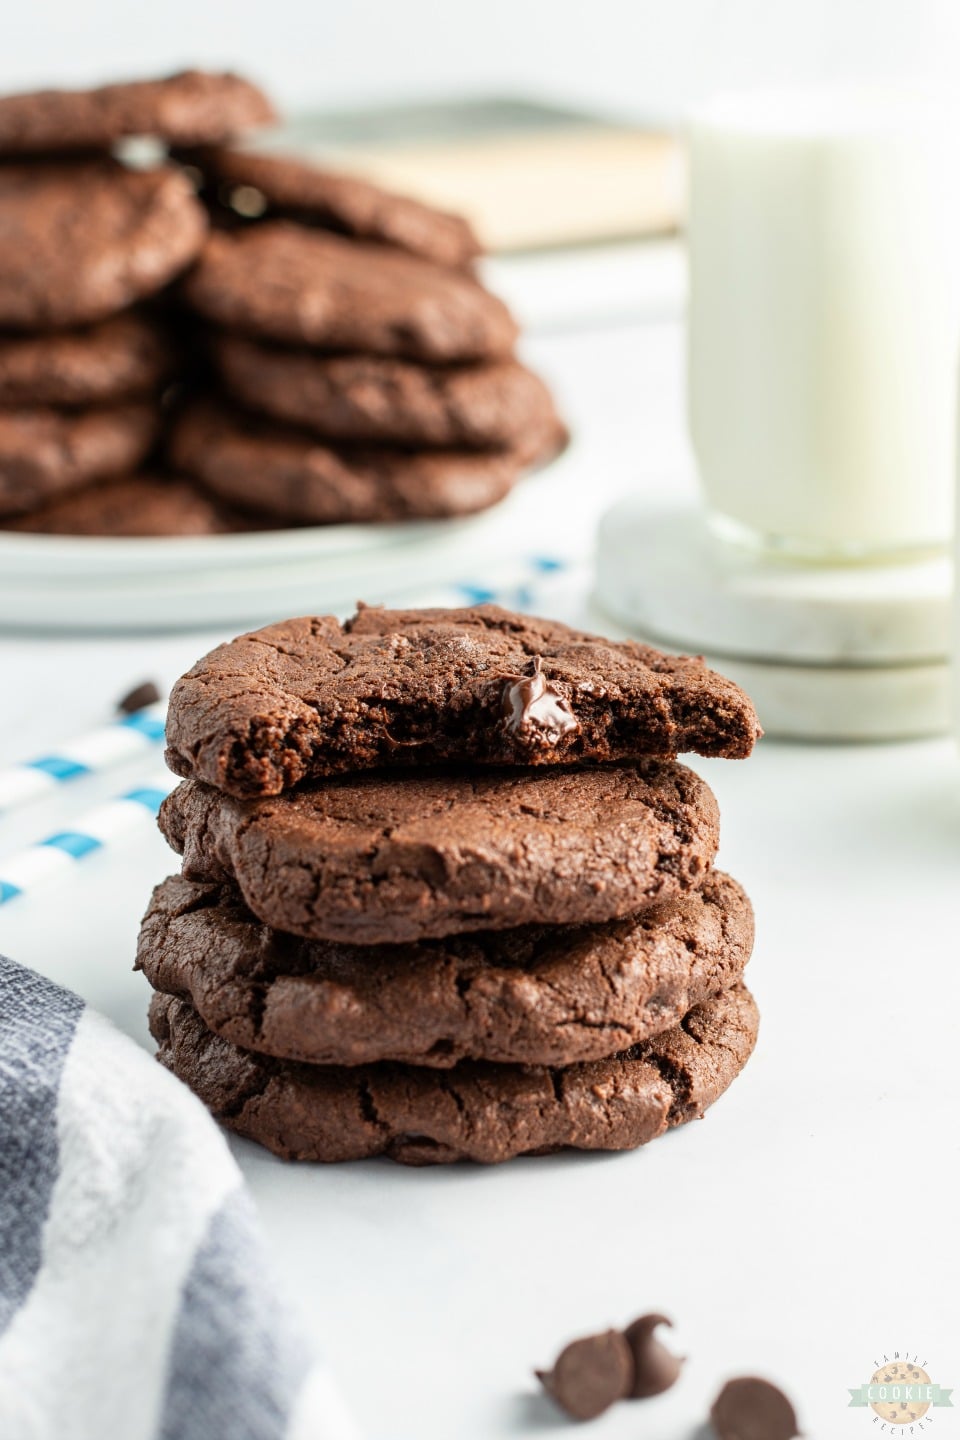 Double Chocolate Chip Cookies made with twice the chocolate for the ultimate chocolate chip cookie! Soft chewy cookies with fantastic chocolate flavor for those who LOVE chocolate!